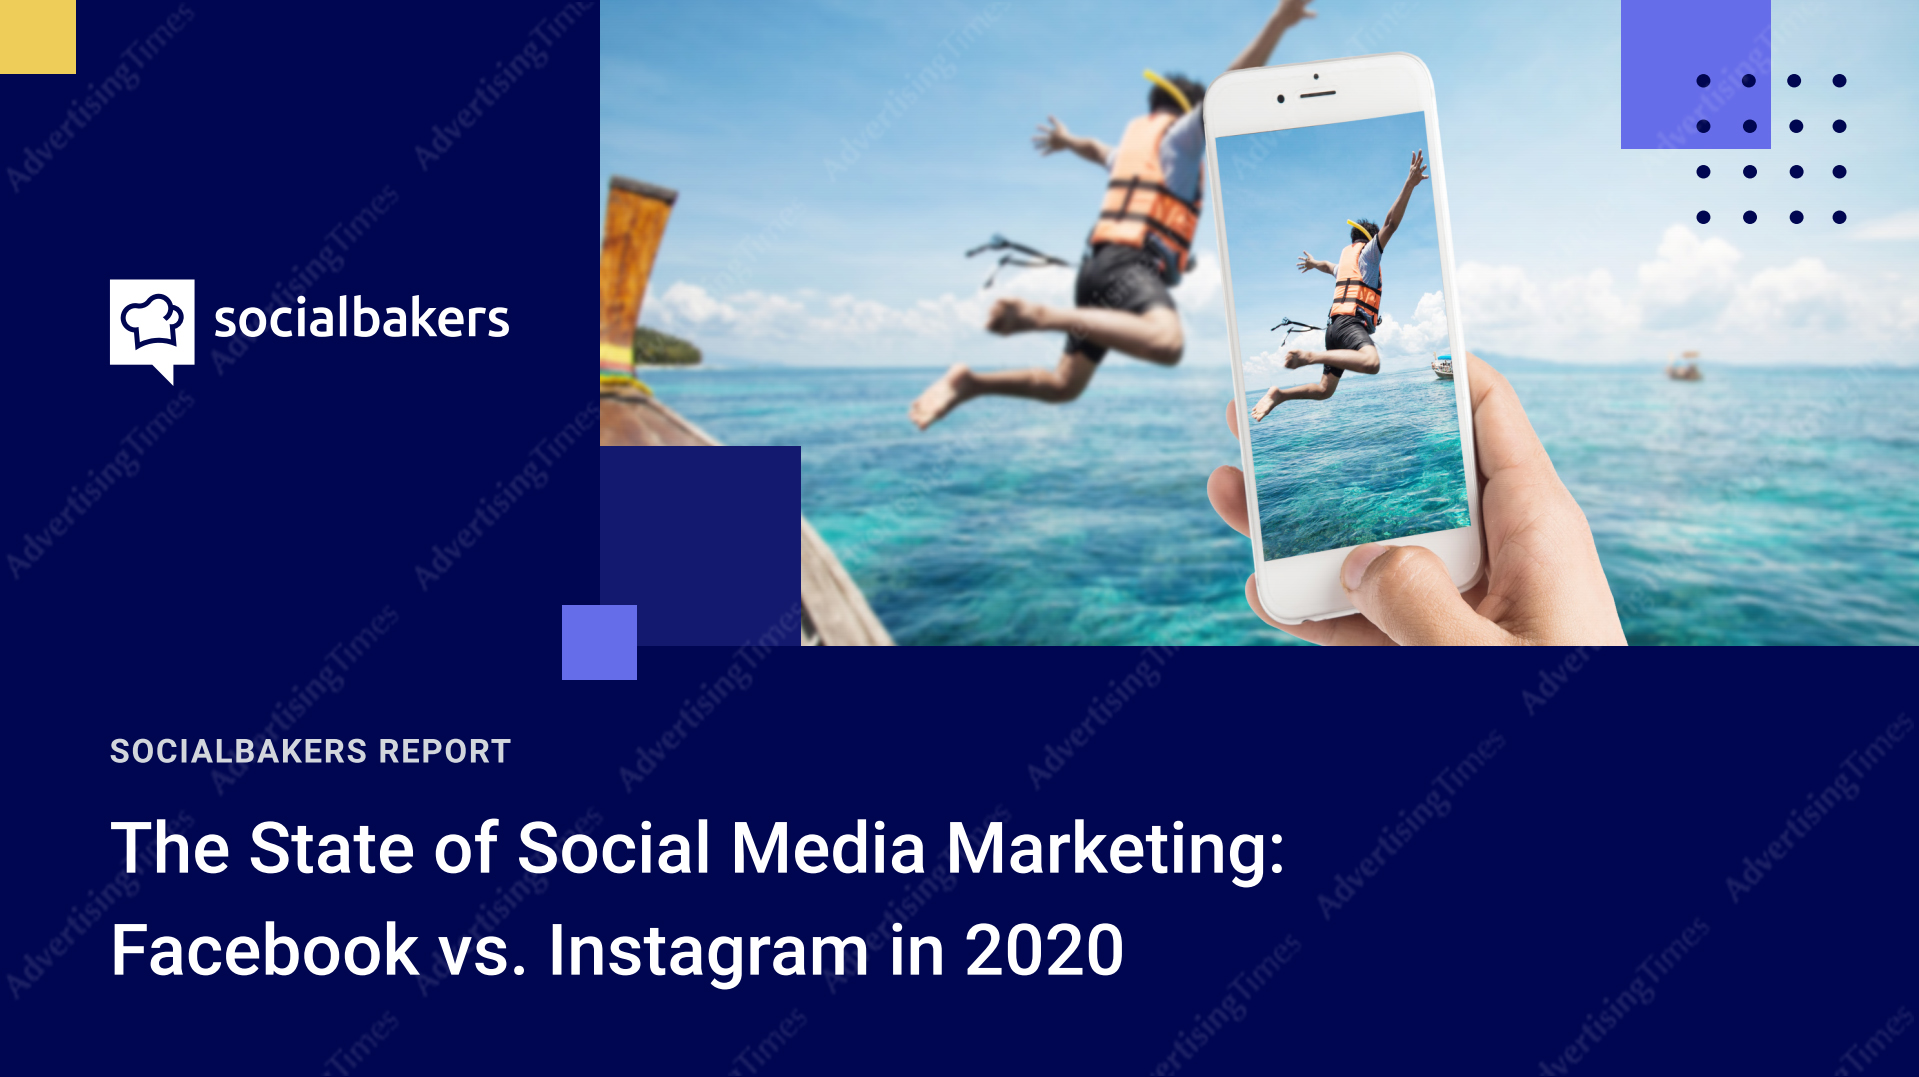 [Download] The State of Social Marketing: Facebook & Instagram in 2020 của Socialbakers - Adtimes.vn